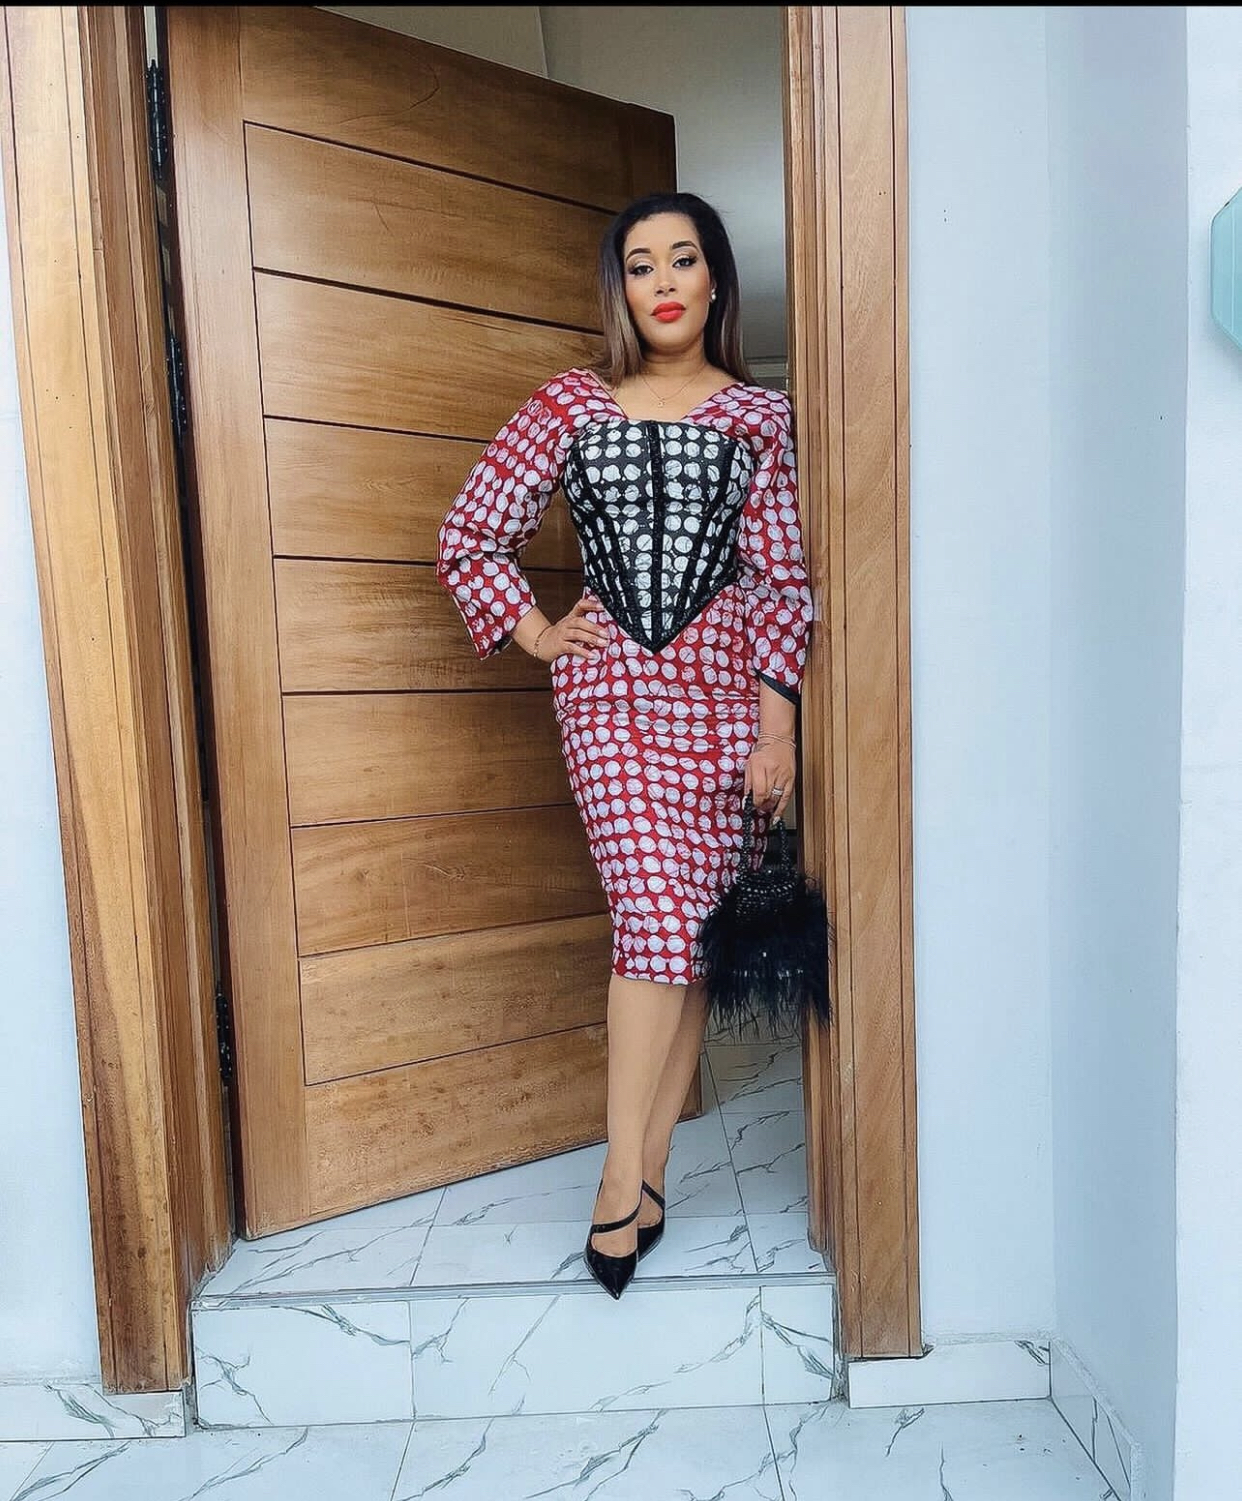 Actress Adunni Ade Schools An Entitled Giveaway Seeker